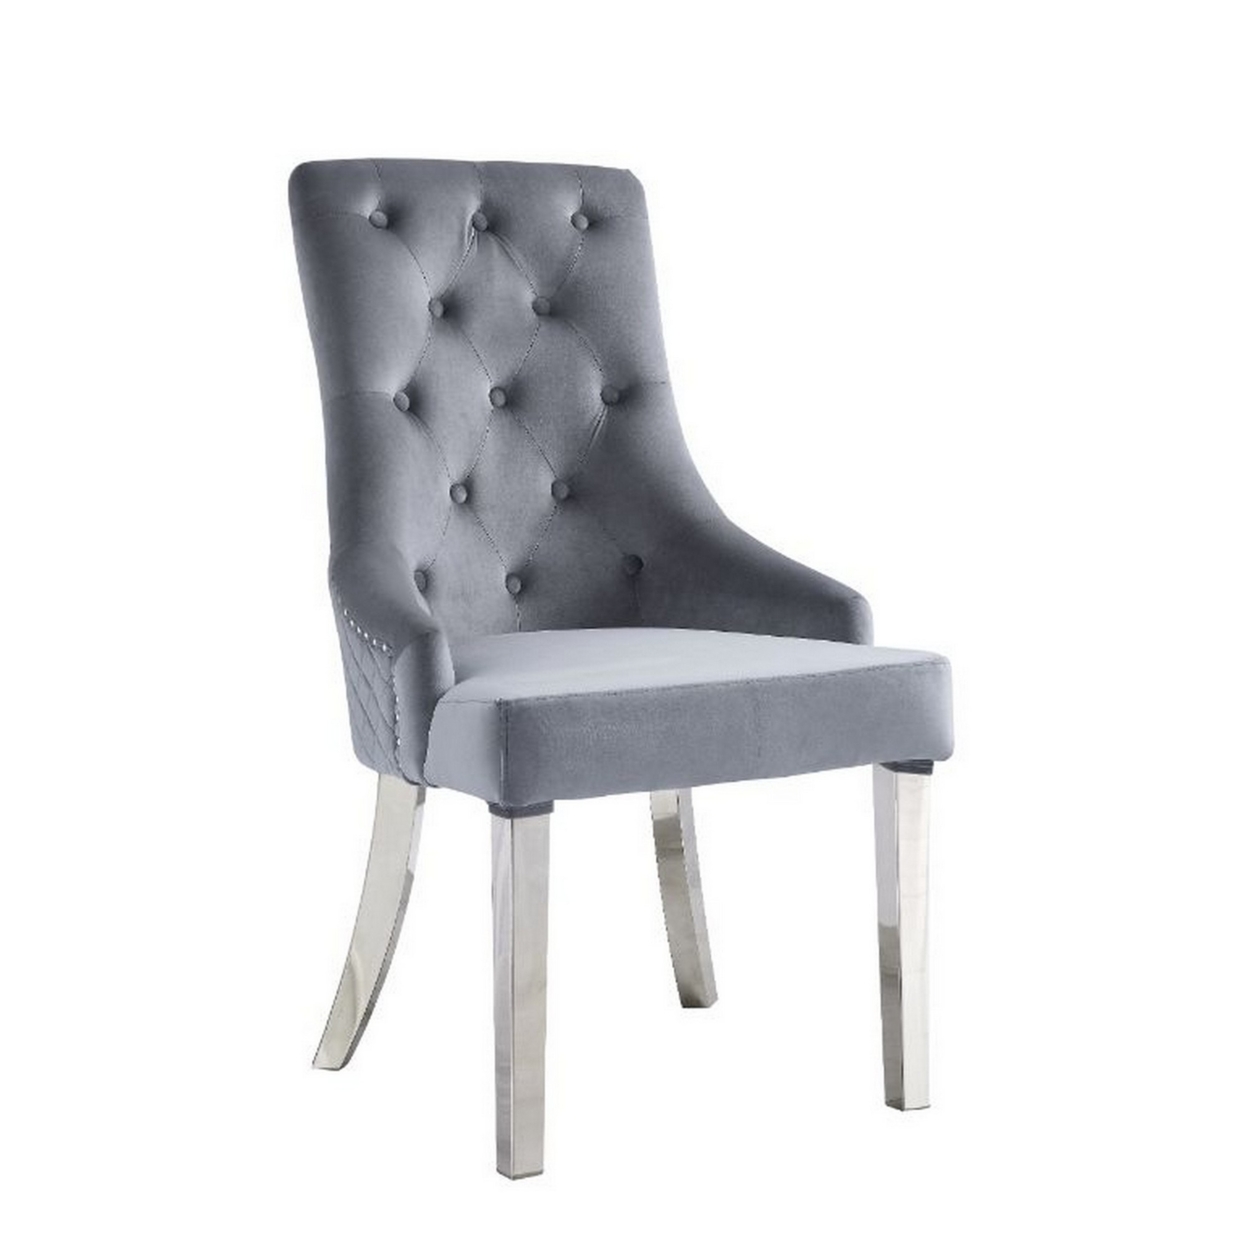 24 Inch Modern Dining Side Chair, Set Of 2, Tufted Smooth Gray Upholstery- Saltoro Sherpi